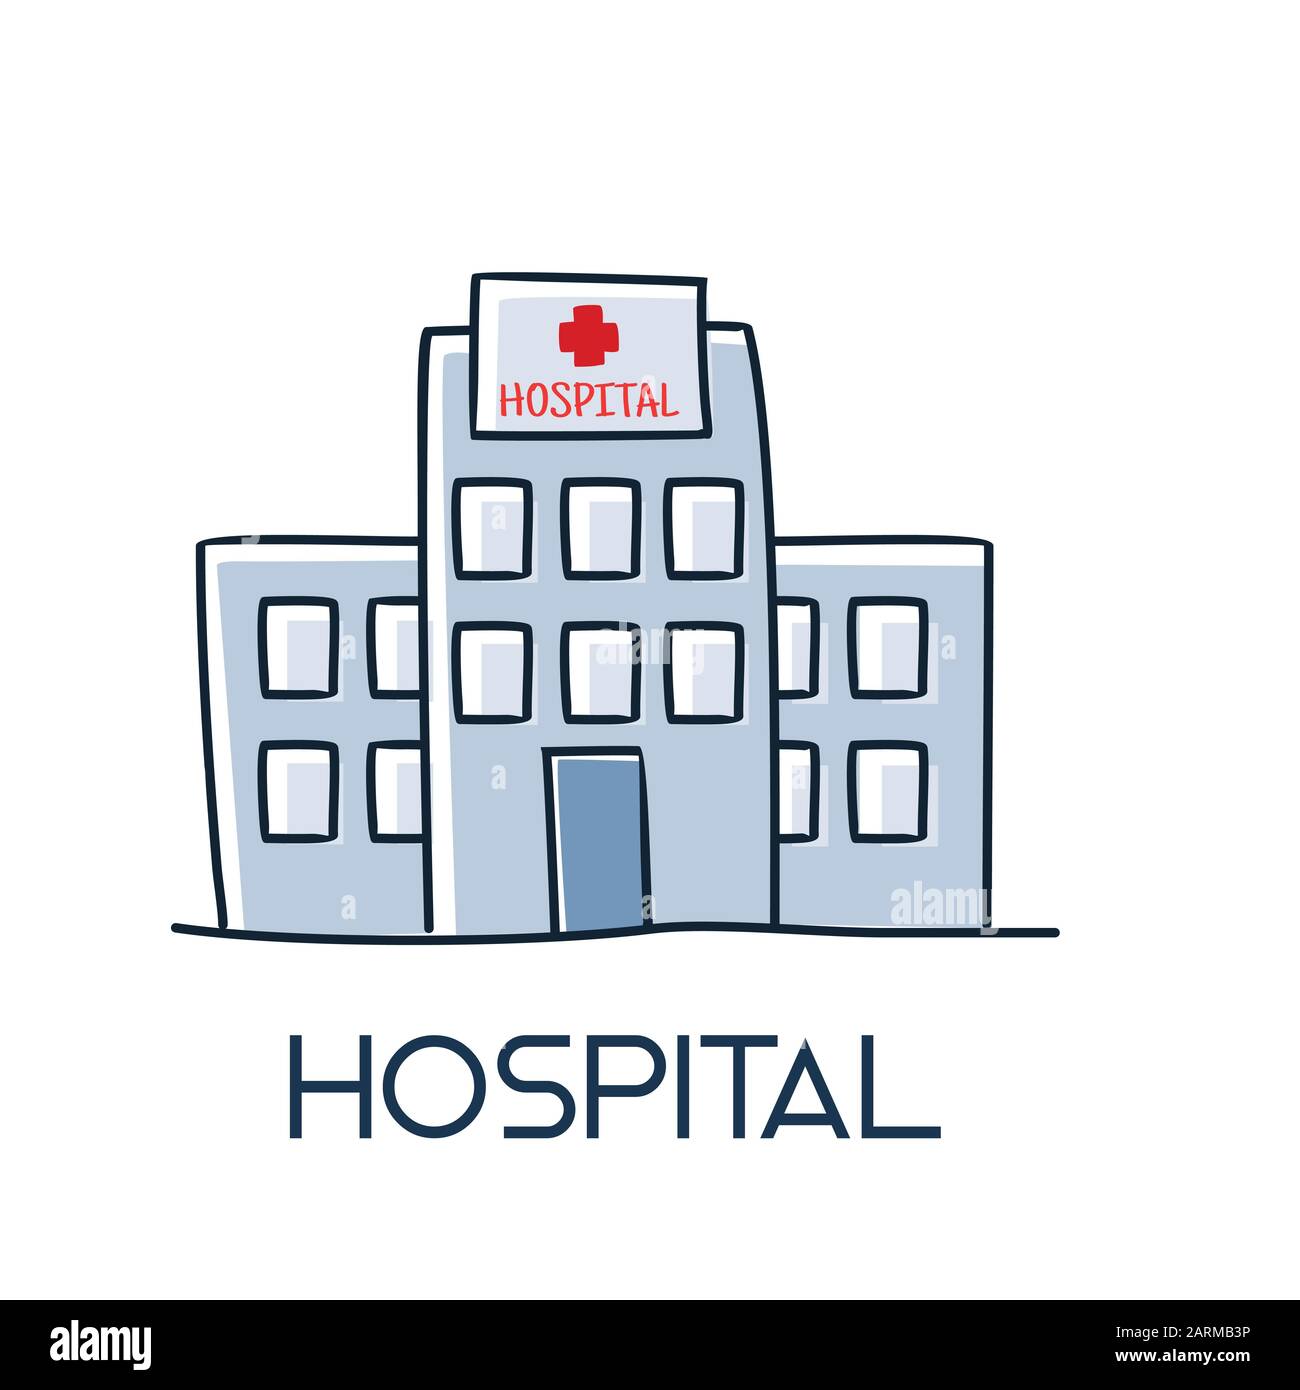 hospital health care building long shadow flat style medic icon illustration Stock Vector